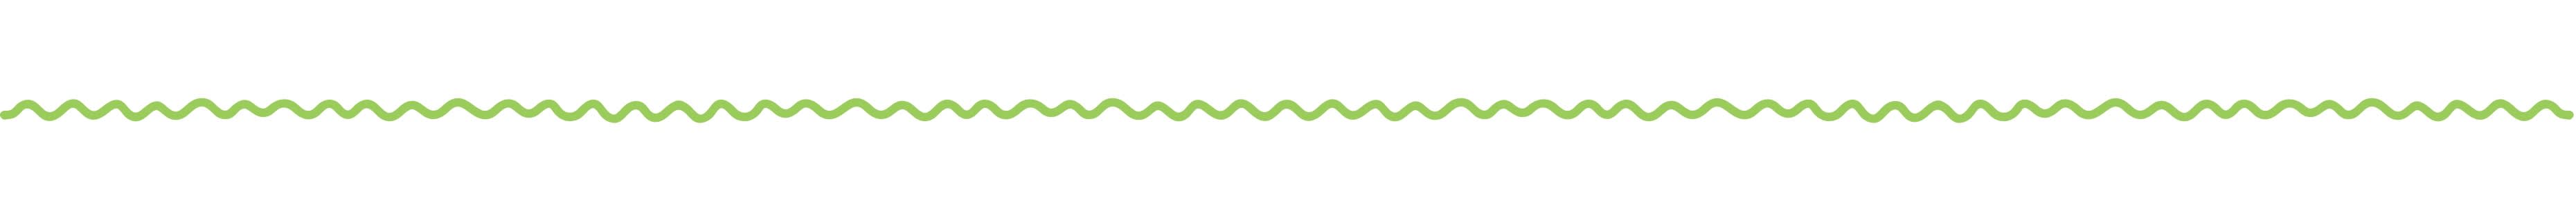 Squiggly green border